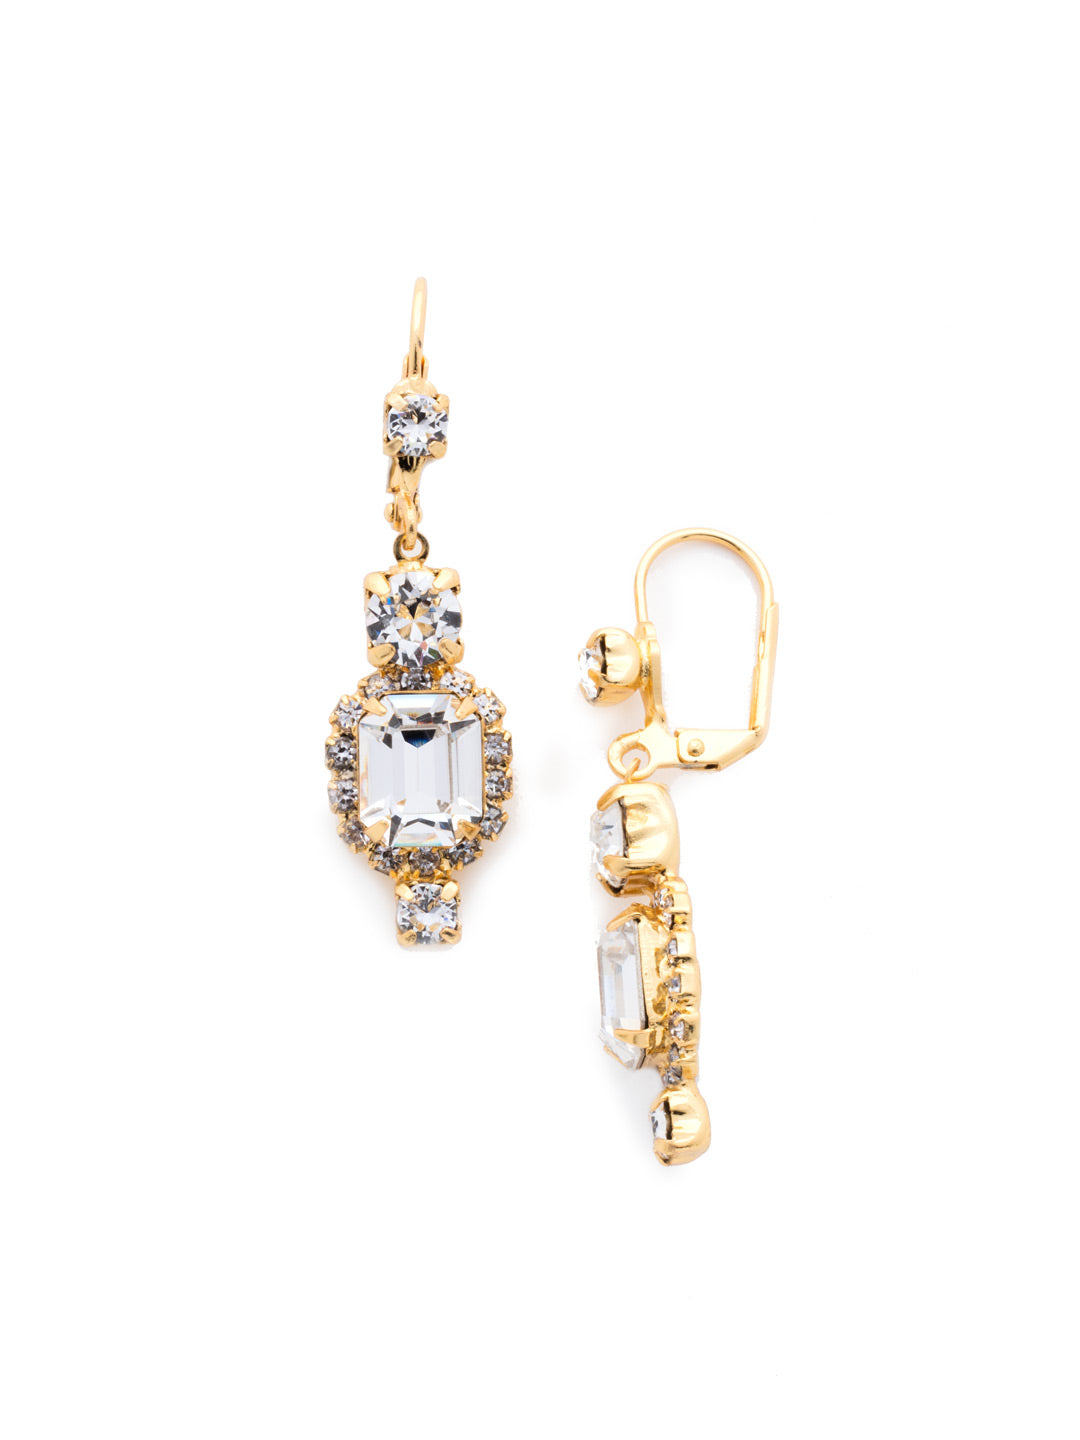 Classic Drop Dangle Earring - EBZ47BGCRY - <p>These french wire drop earrings exude glamour from every crystal. An emerald cut central crystal is encircled with smaller round stones and set between two circular crystals. From Sorrelli's Crystal collection in our Bright Gold-tone finish.</p>